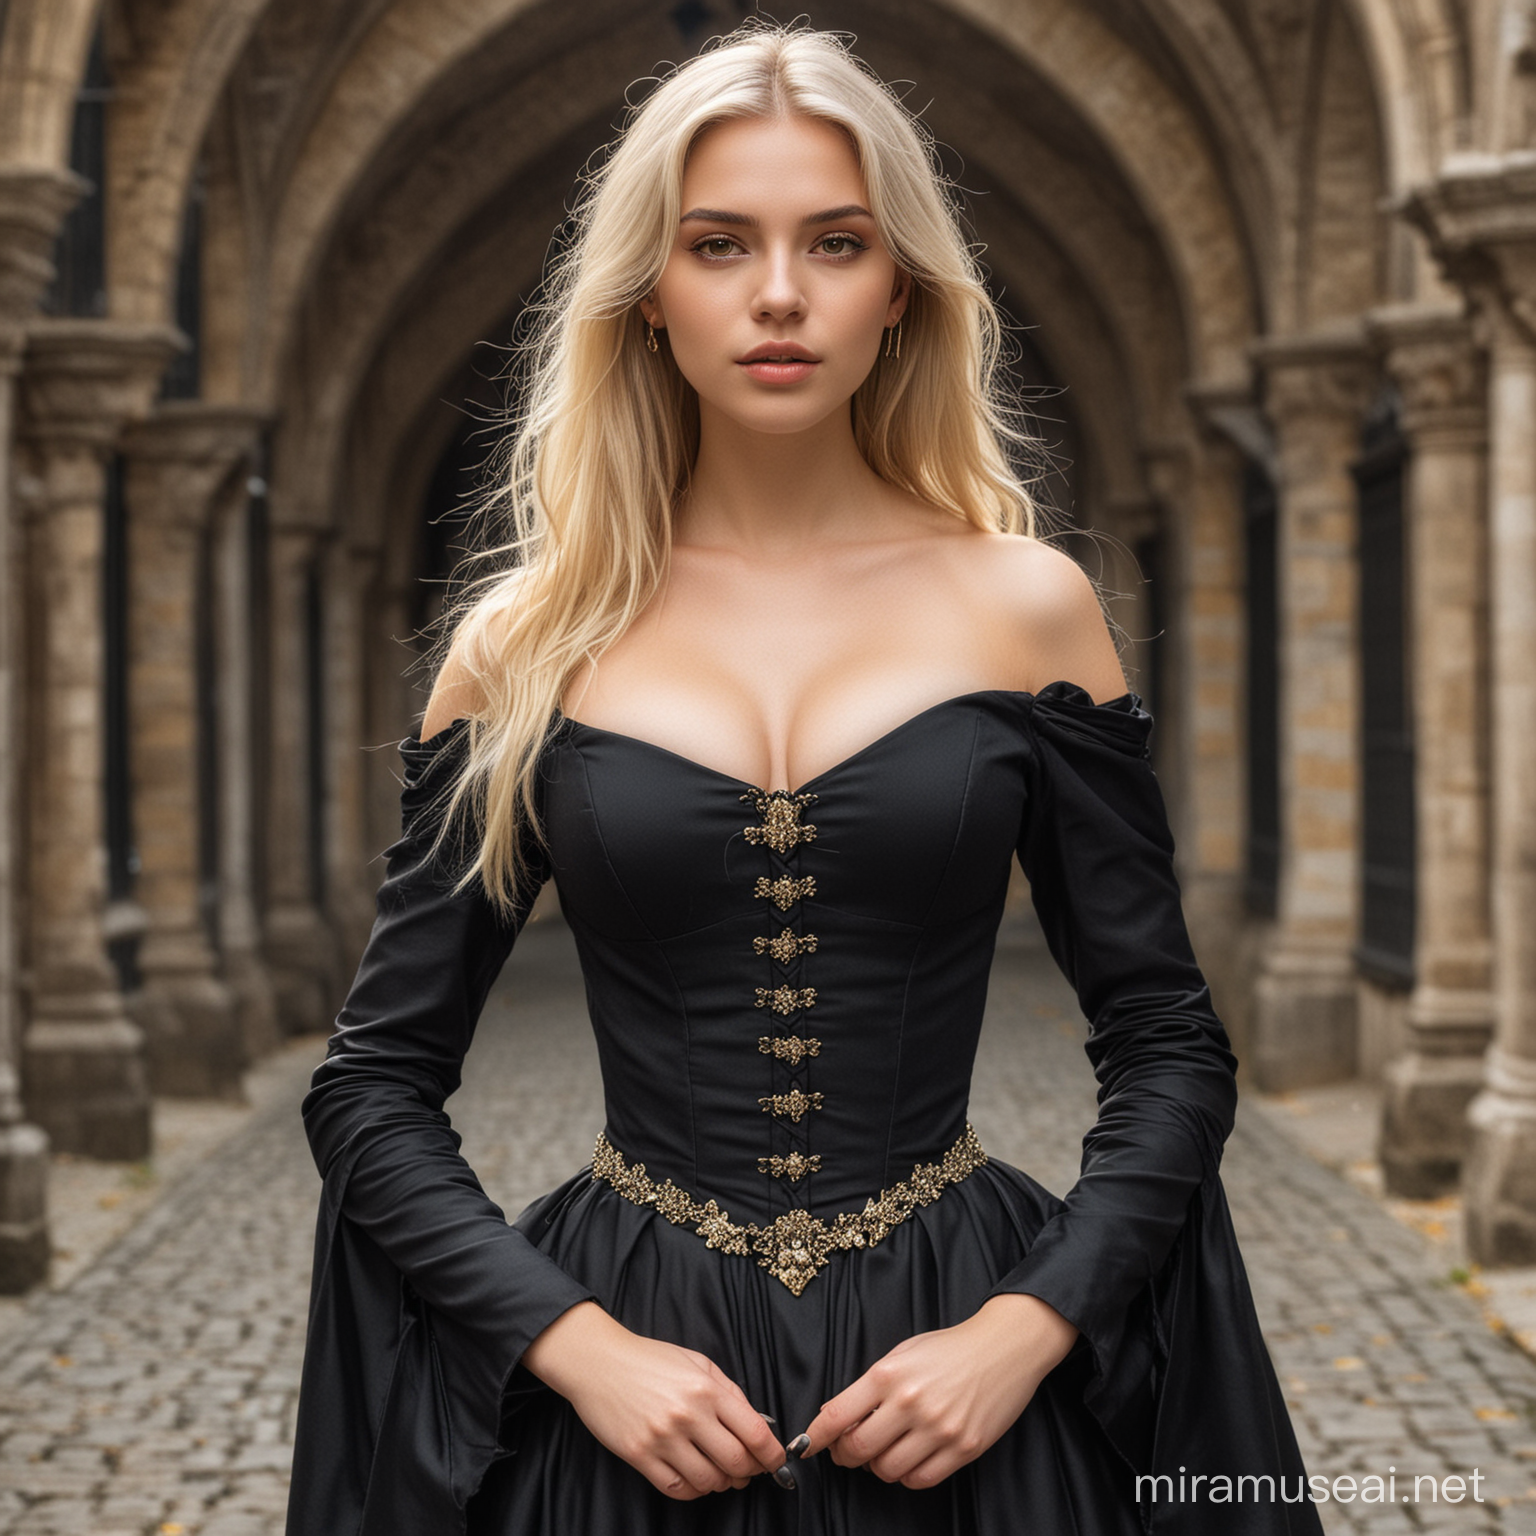 young beautiful woman who possesses light blonde hair that reaches to her waist and yellow eyes. She wears a black medieval dress that expose her shoulders and the upper part of her big chest. She wears high heels. 

